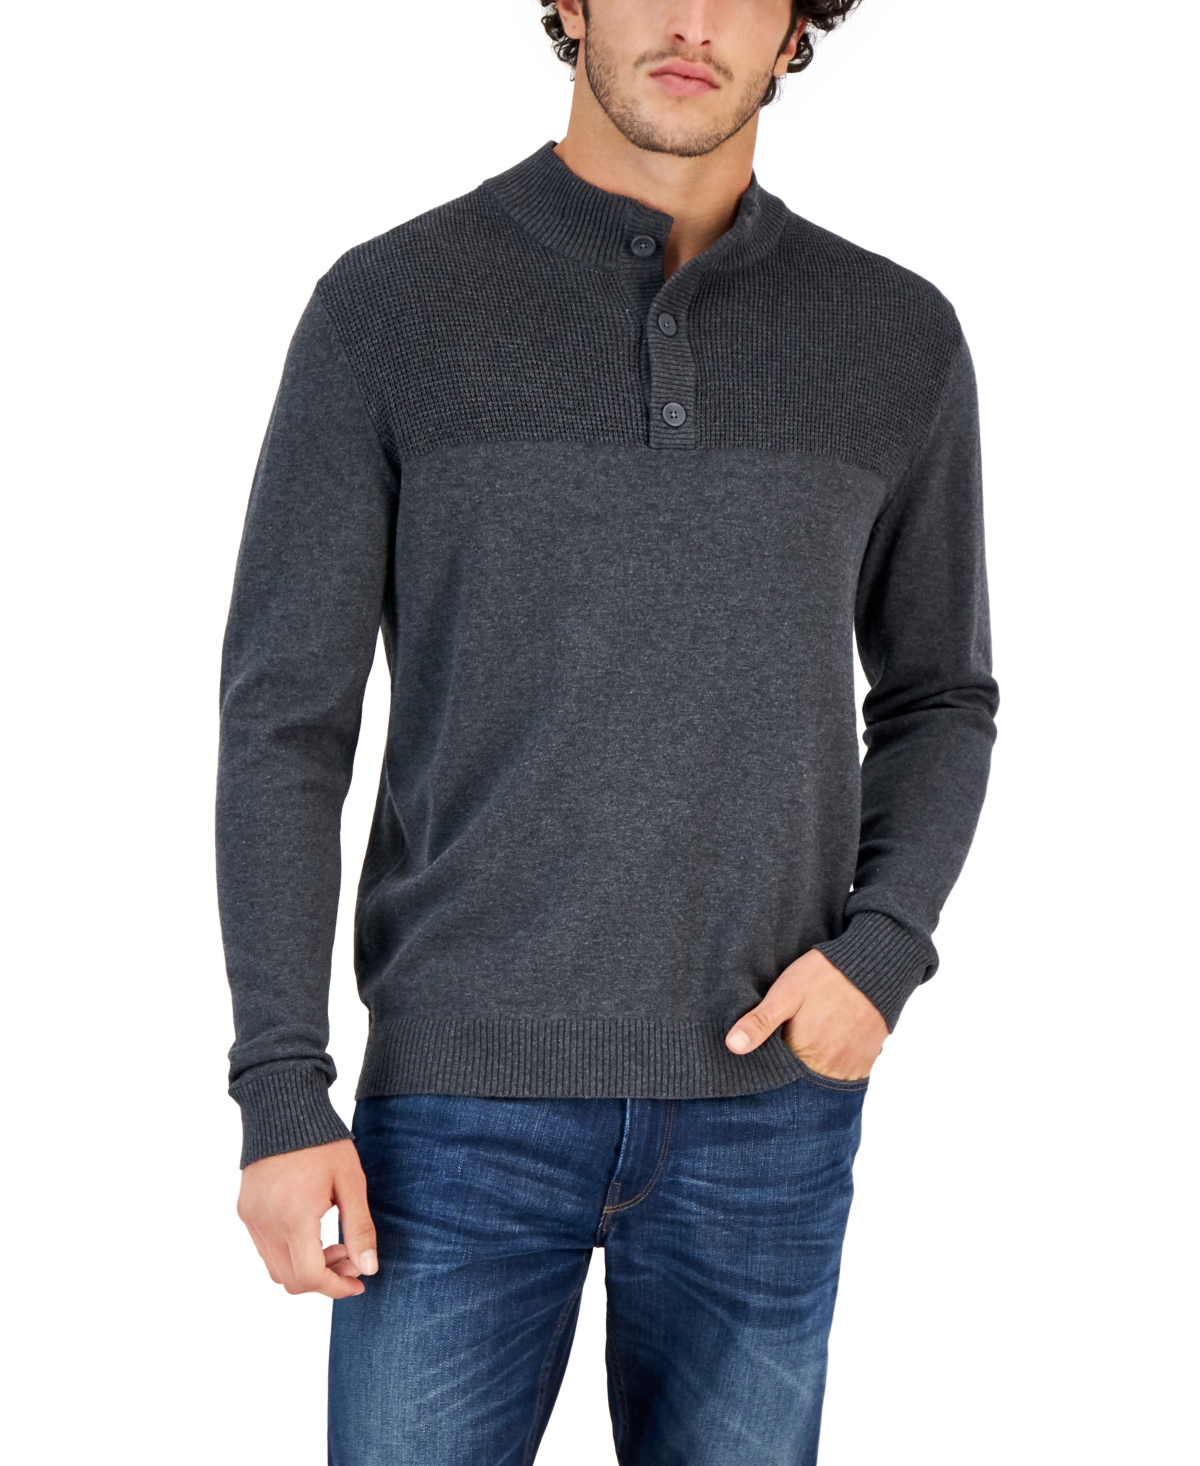 CLUB ROOM MEN'S BUTTON MOCK NECK SWEATER, CREATED FOR MACY'S